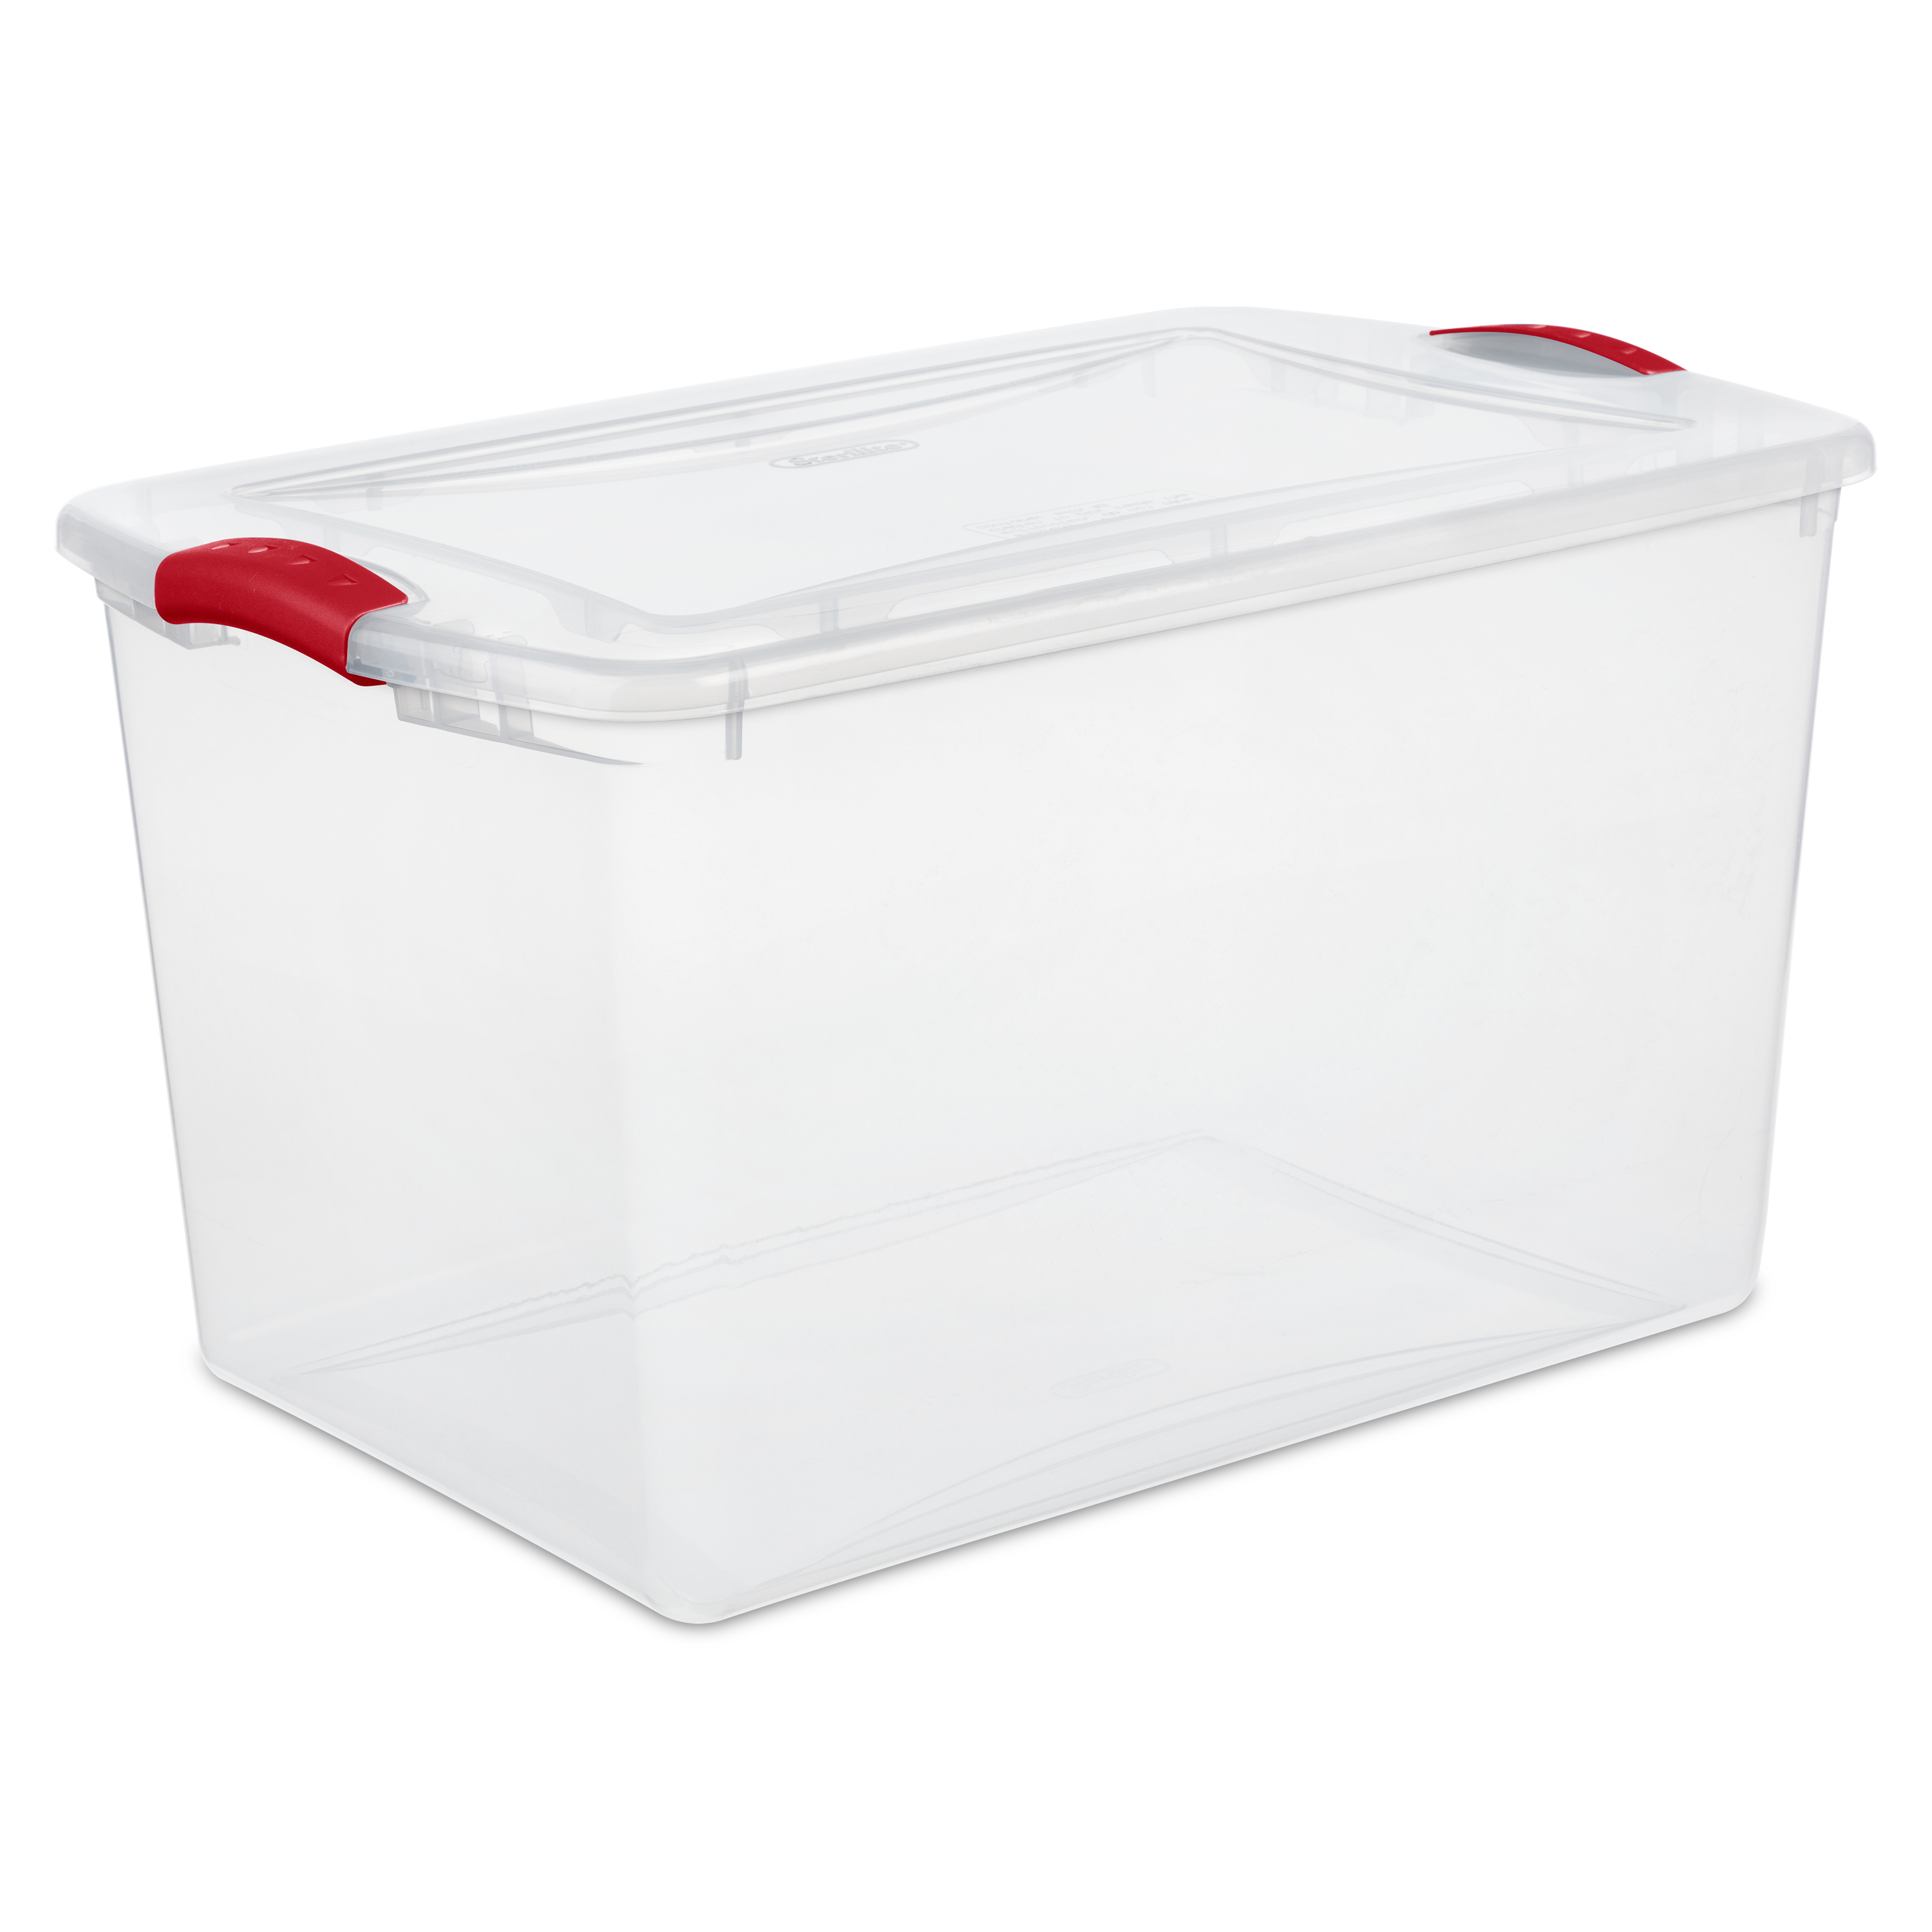 Sterilite 66 Qt. Latching Storage Containers (Infra Red) $2 (In store - YMMV)